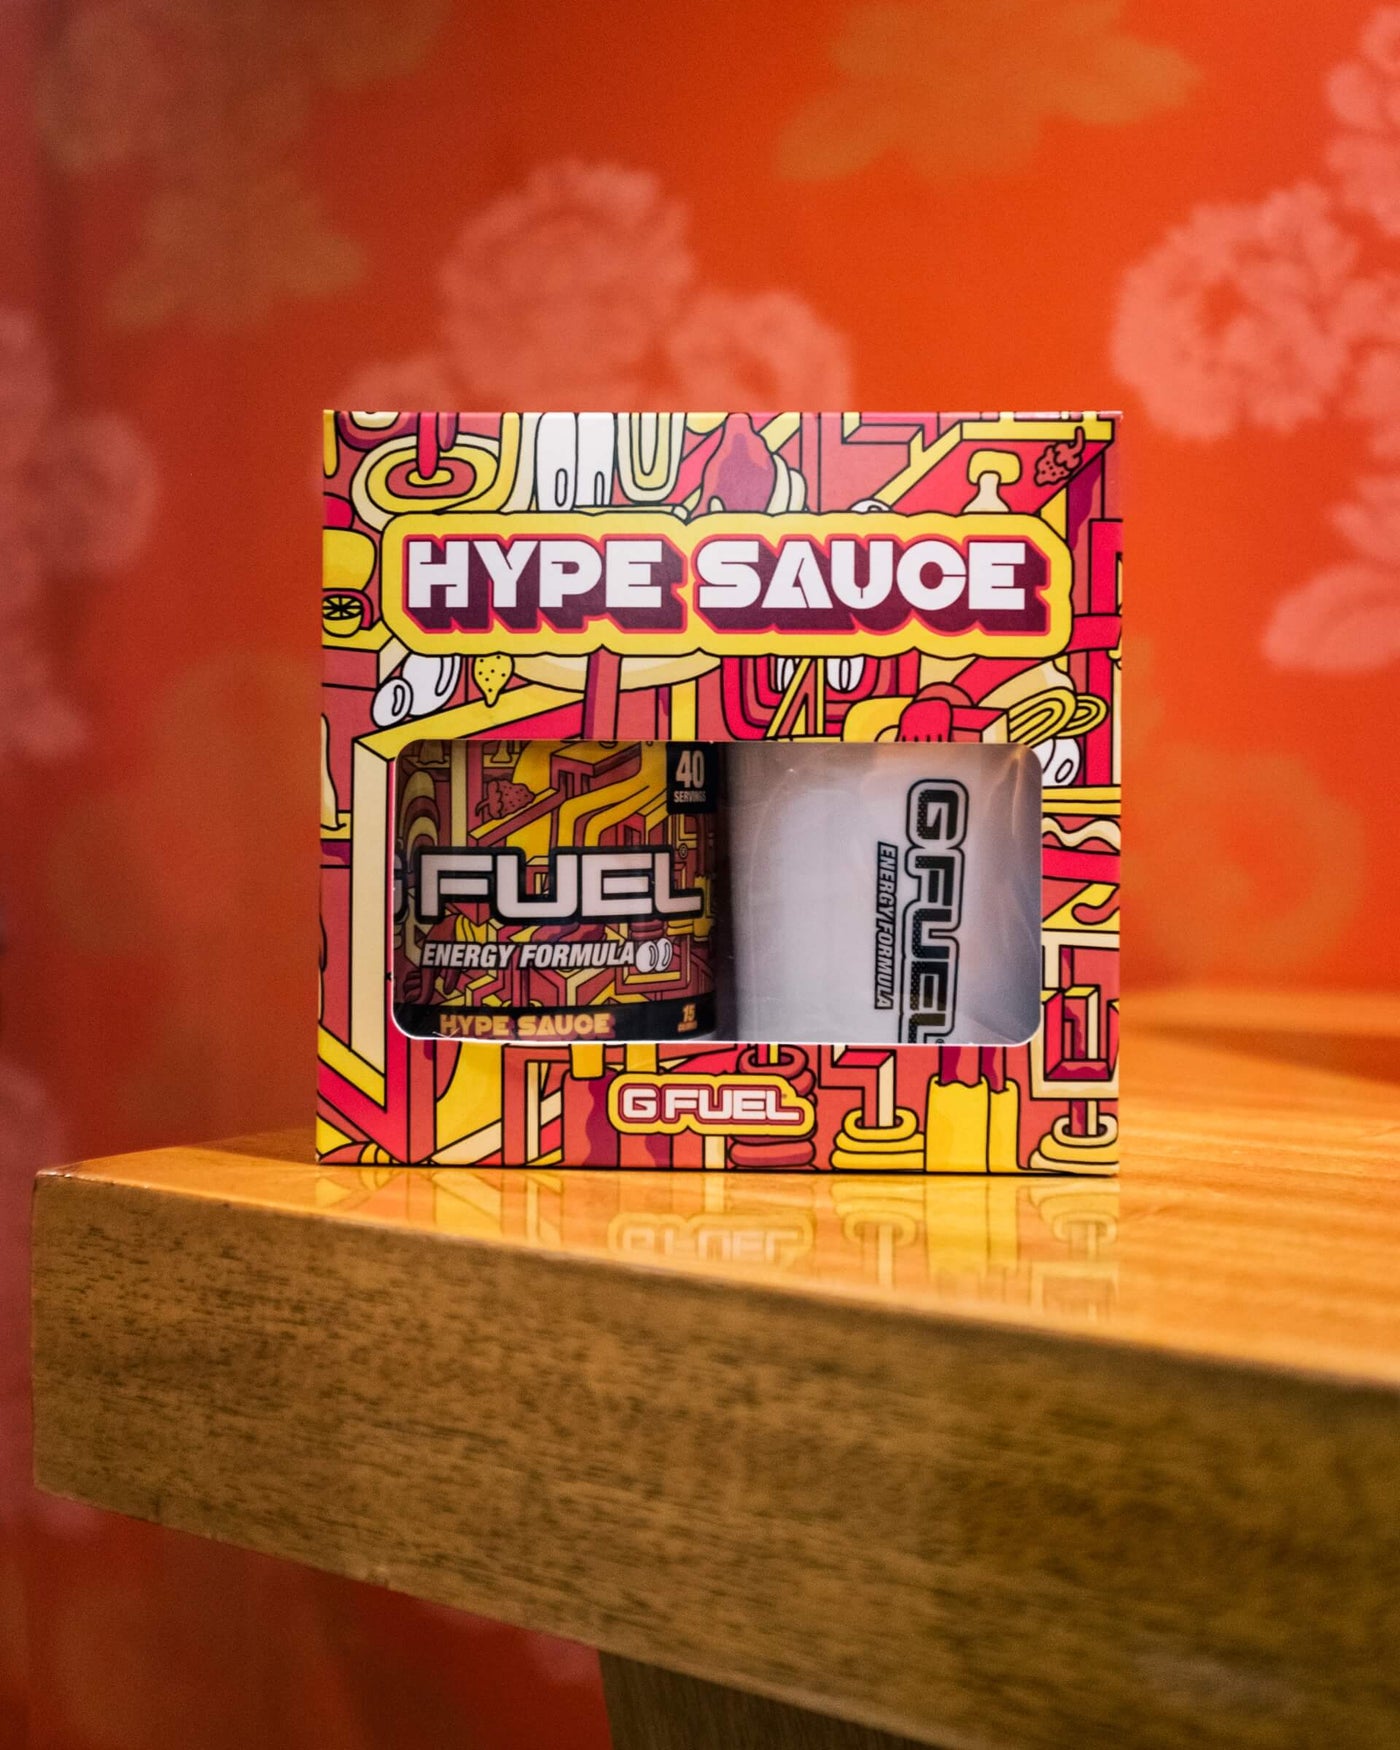 G FUEL HYPE SAUCE collectors box, which includes one HYPE SAUCE tub and one HYPE SAUCE shaker cup, is on a wooden table.